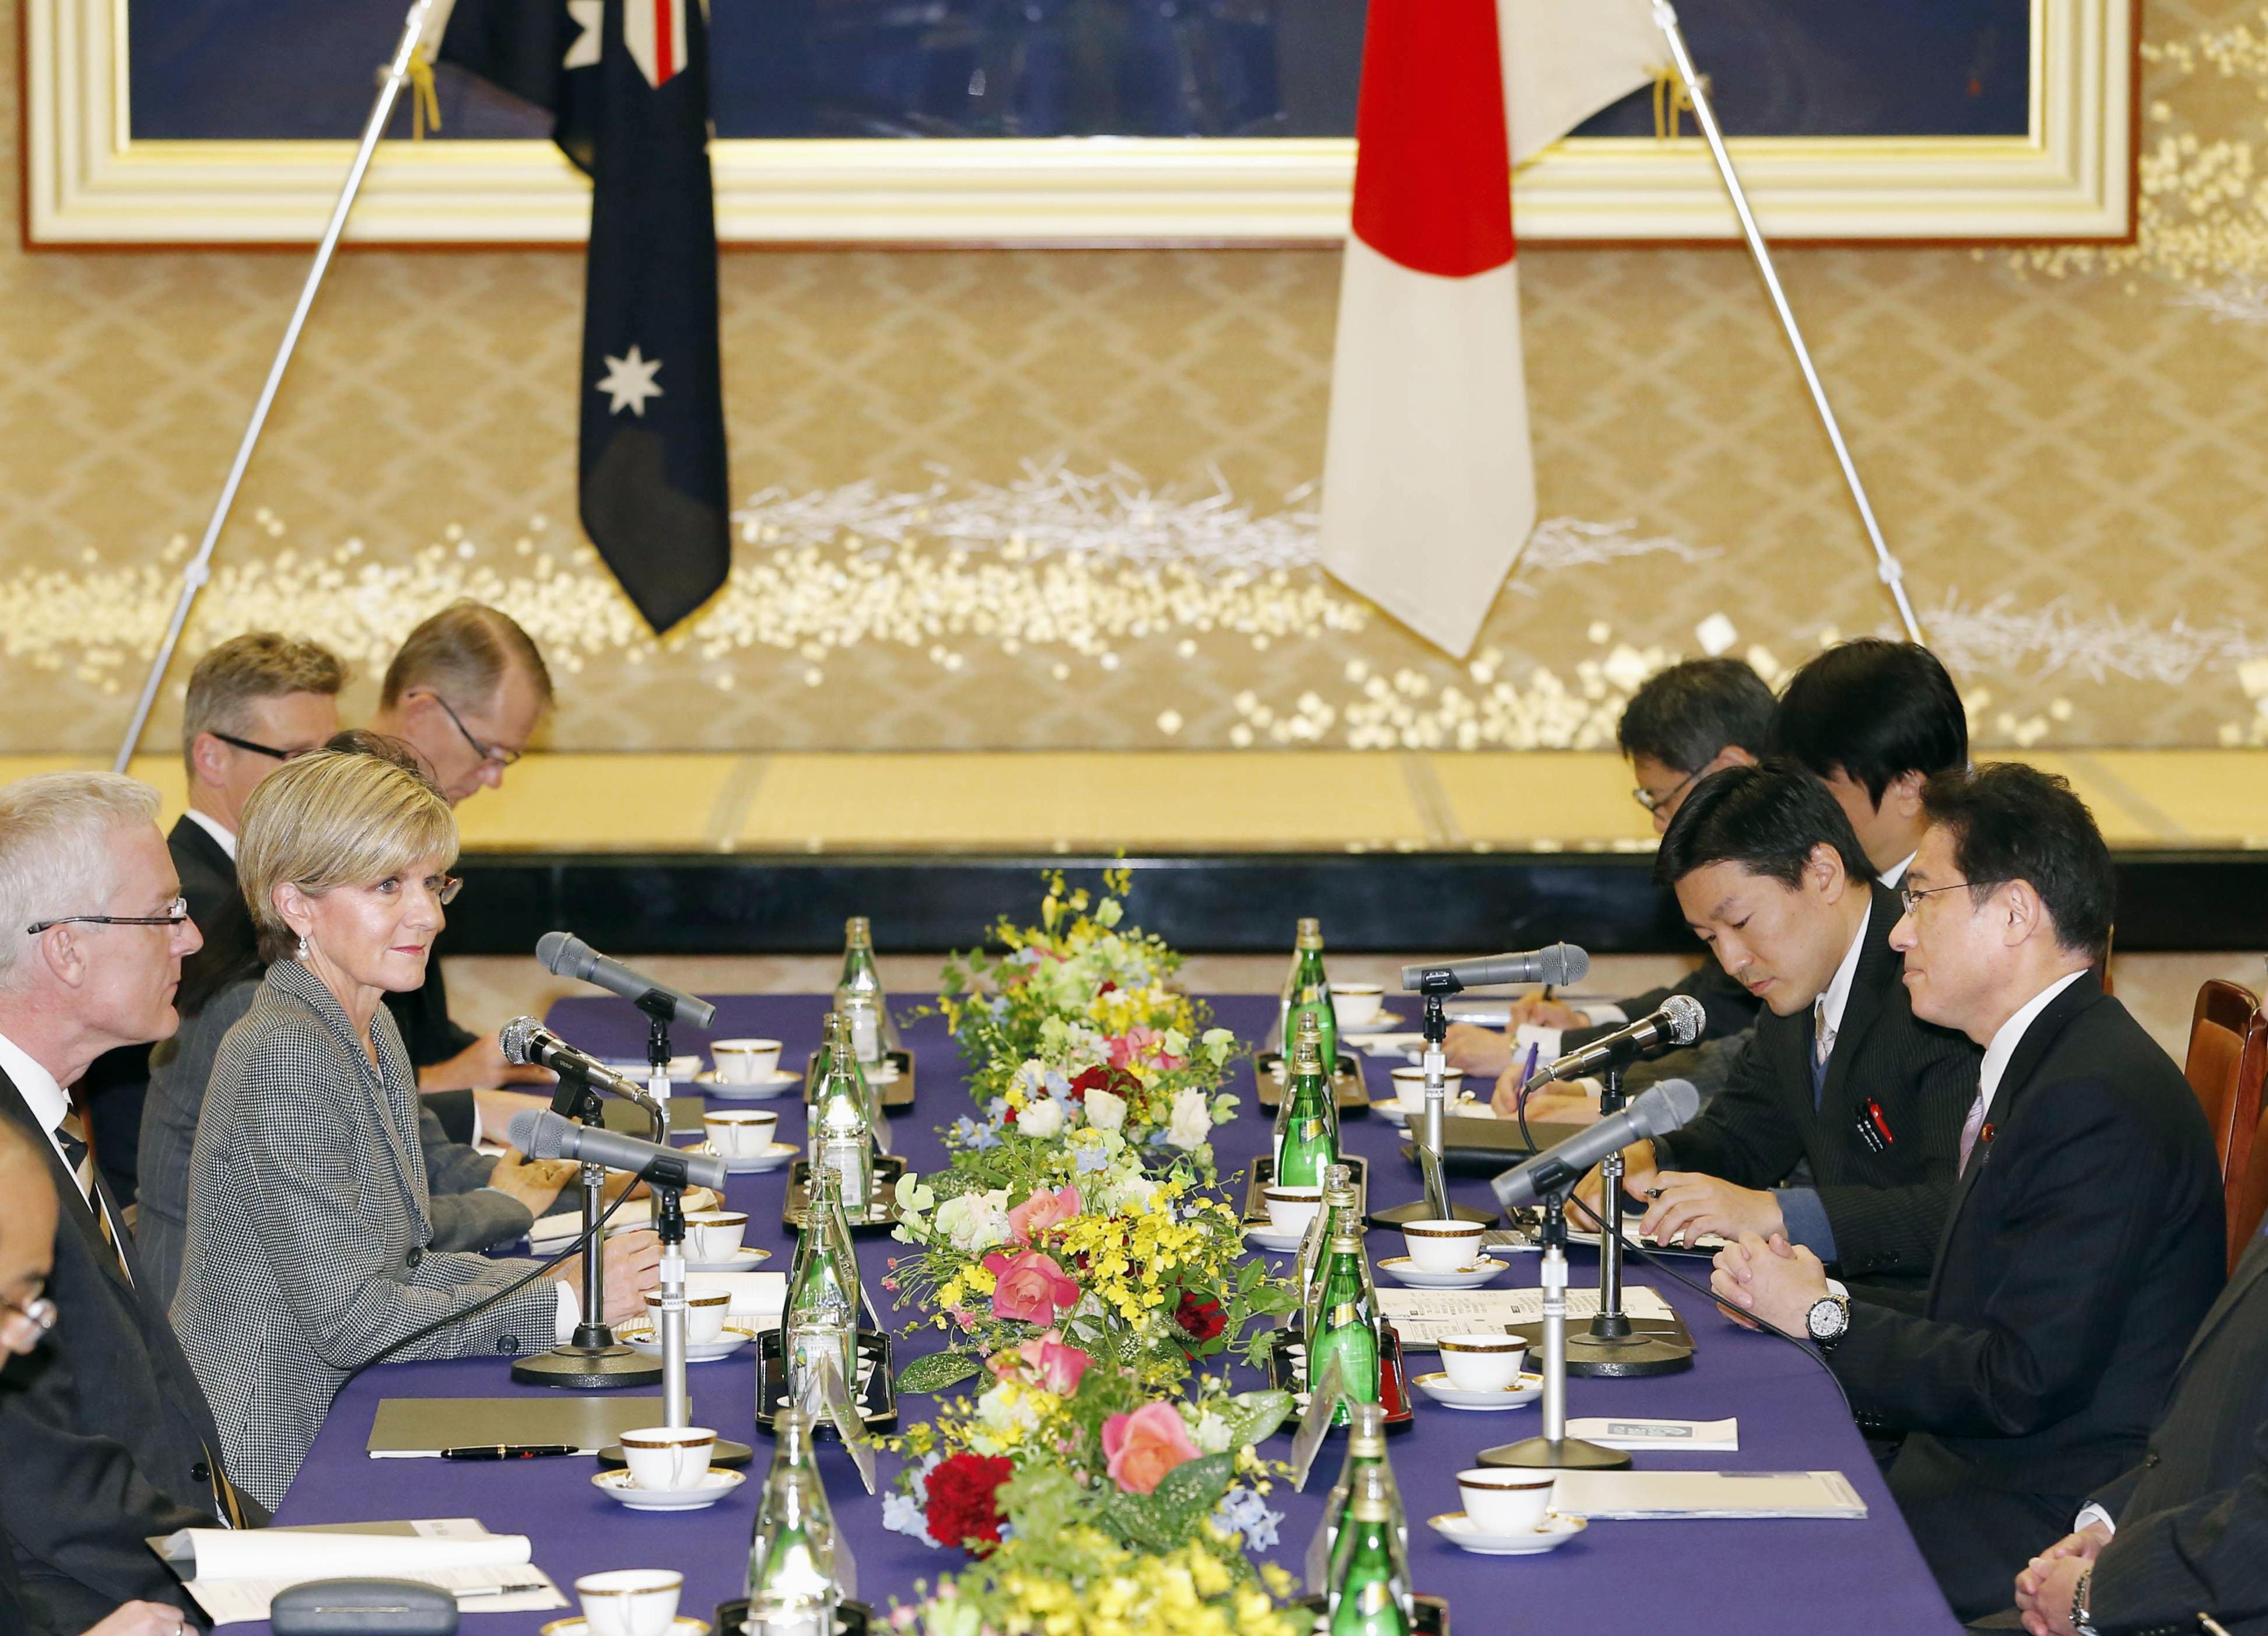 Foreign Minister Fumio Kishida and his Australian counterpart, Julie Bishop, sit down for a meeting in Tokyo on Monday. | KYODO